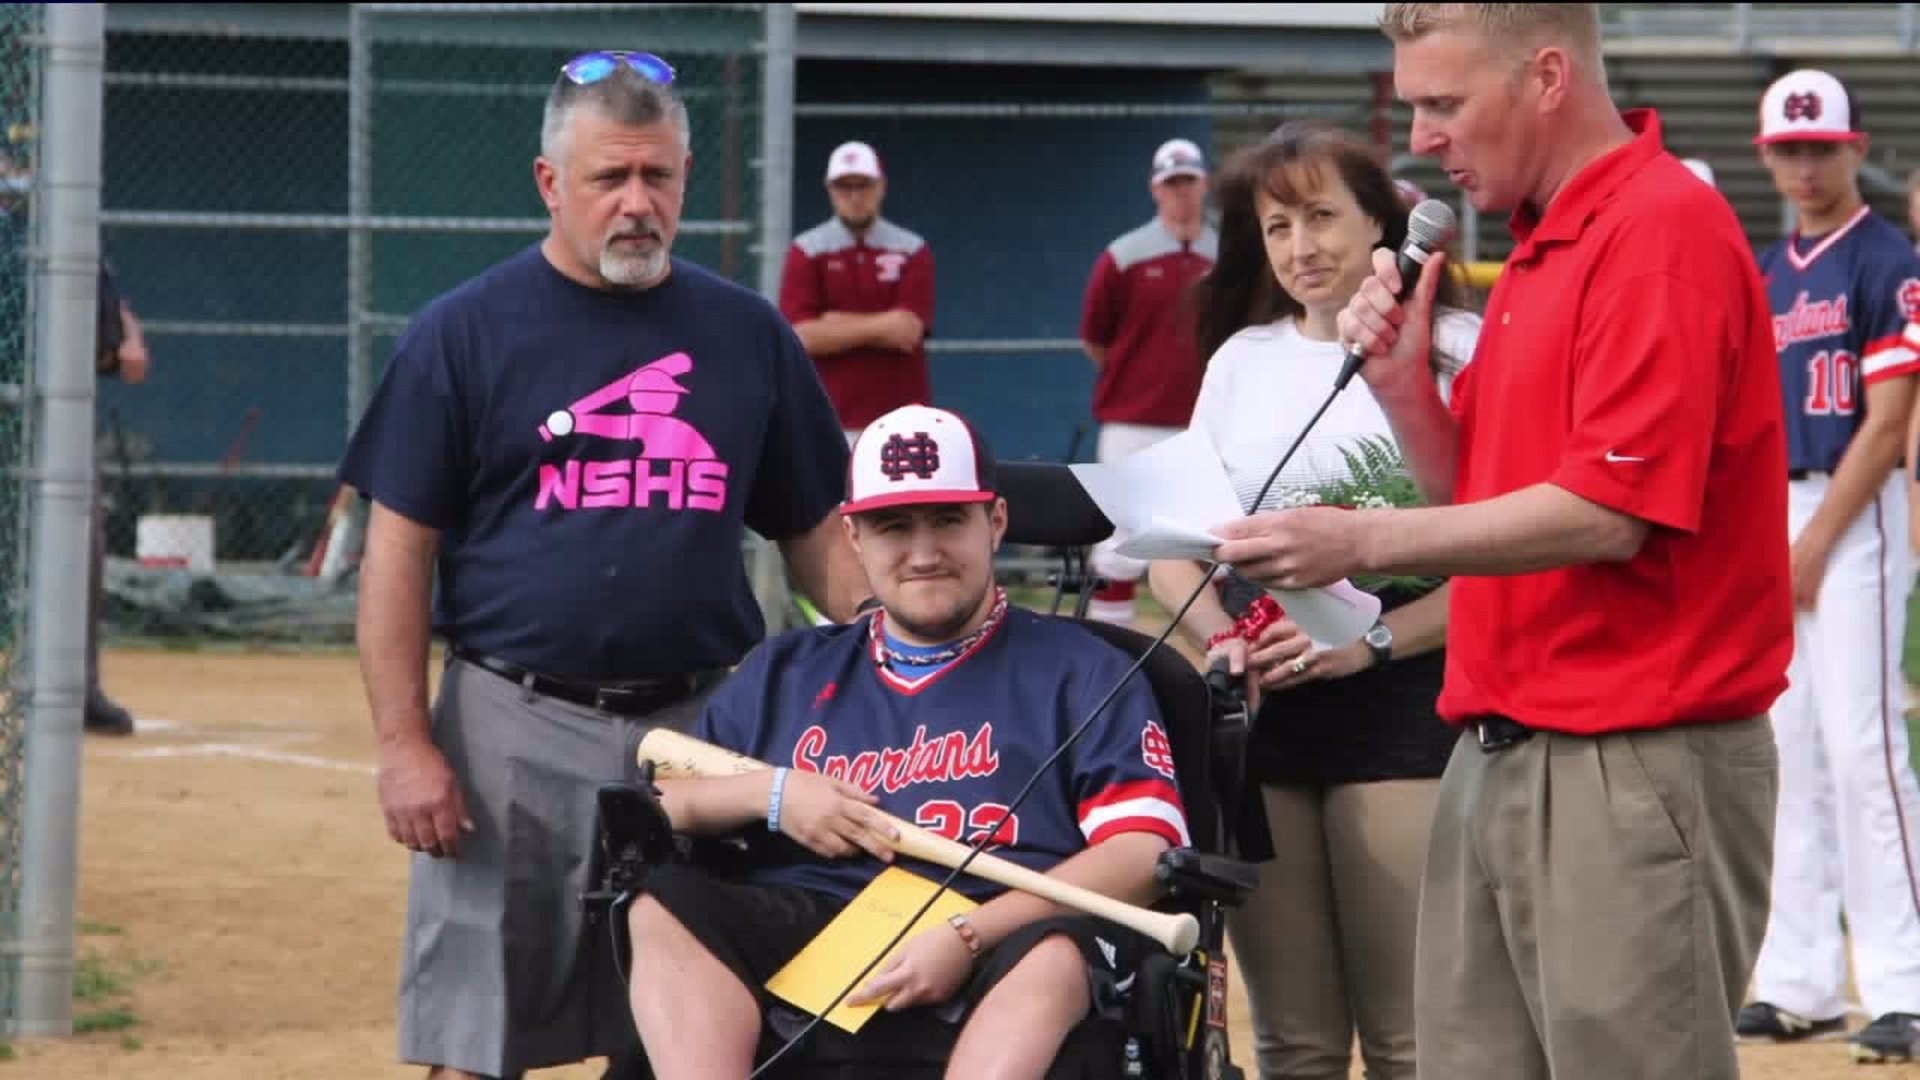 Baseball Coach`s Plan to Make Dream Come True for Team Manager with Disability Denied by PIAA